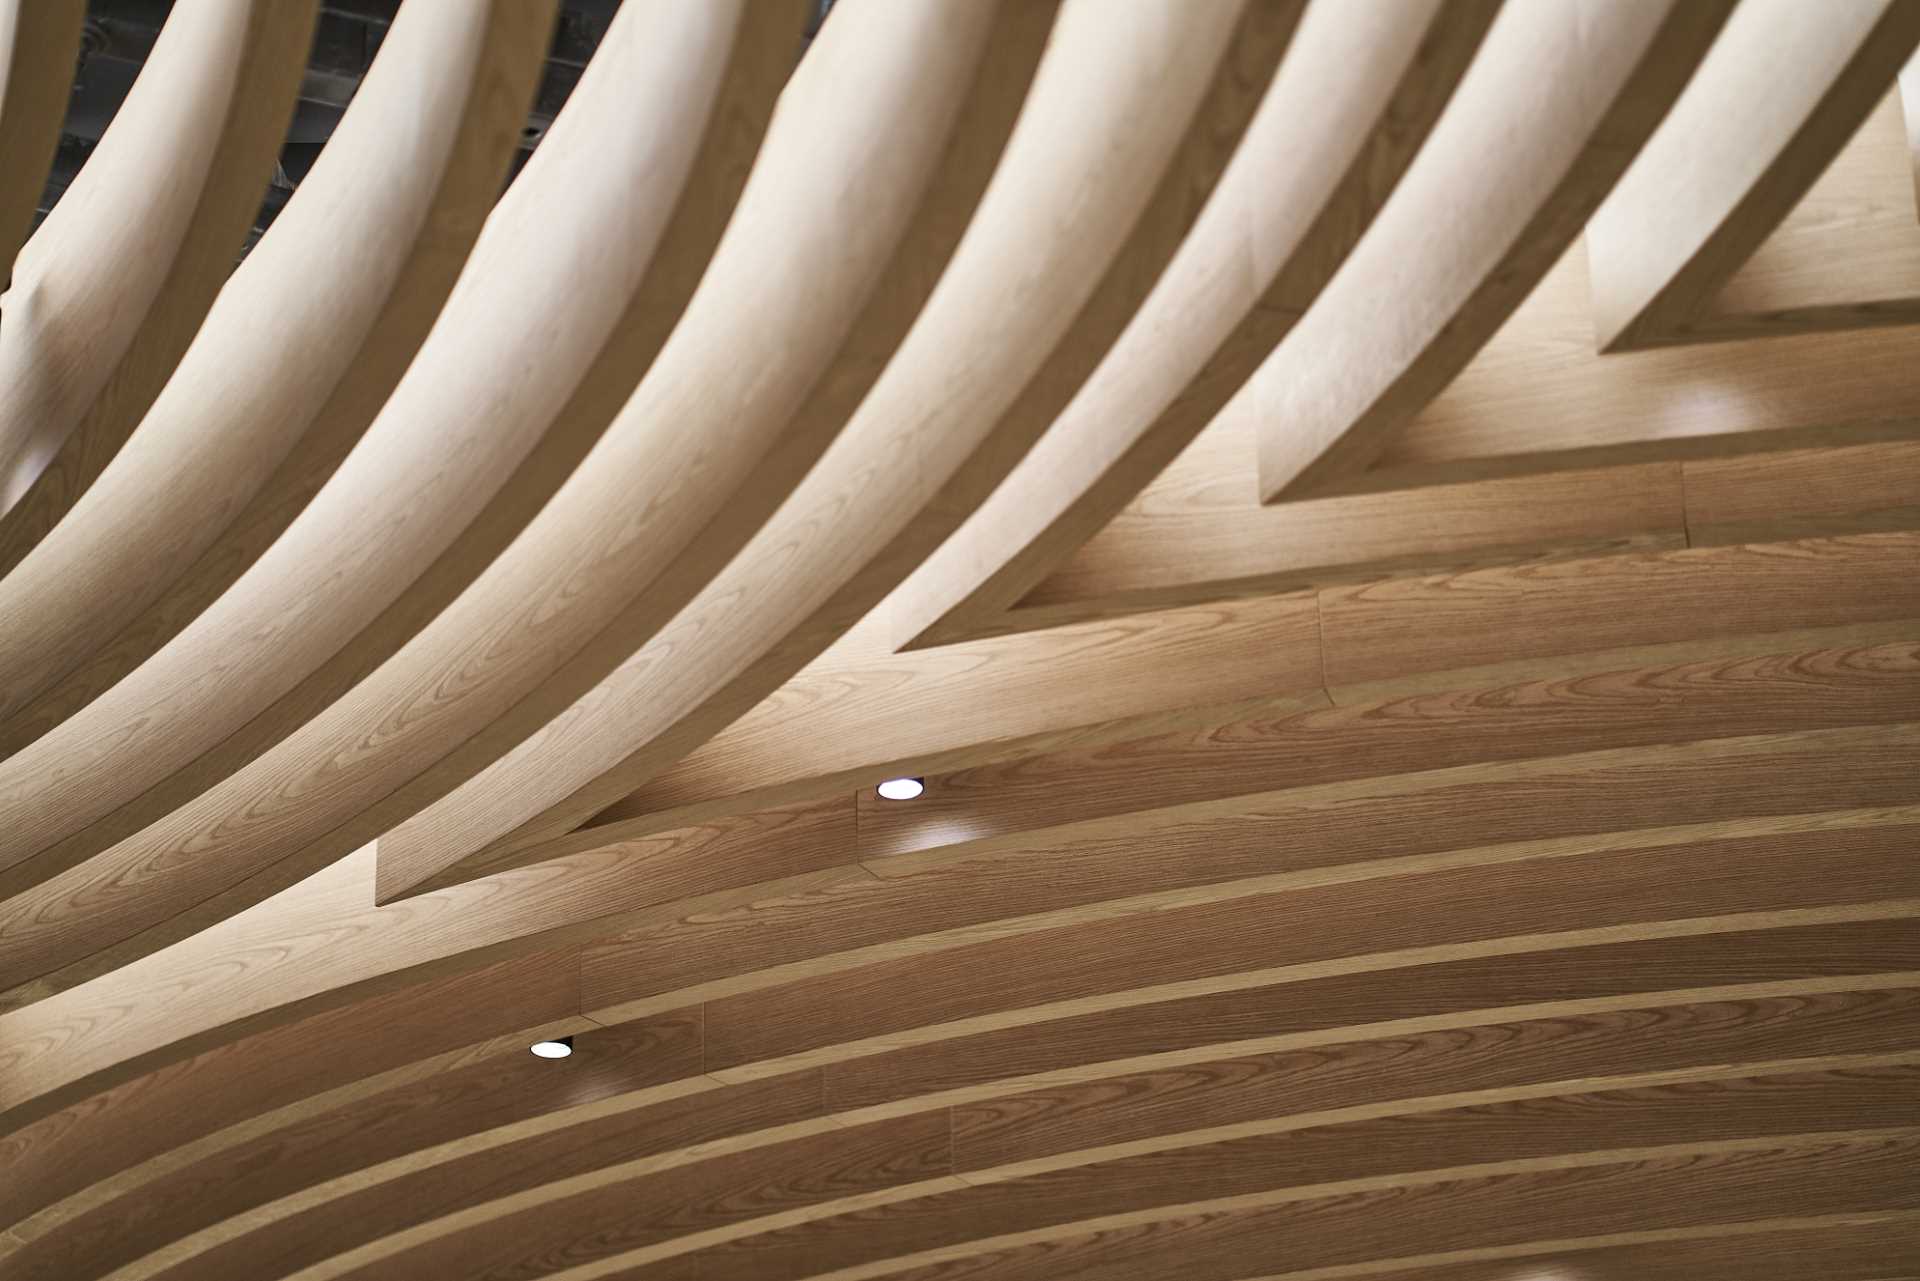 A sculptural ceiling includes curved wood in geometric patterns.